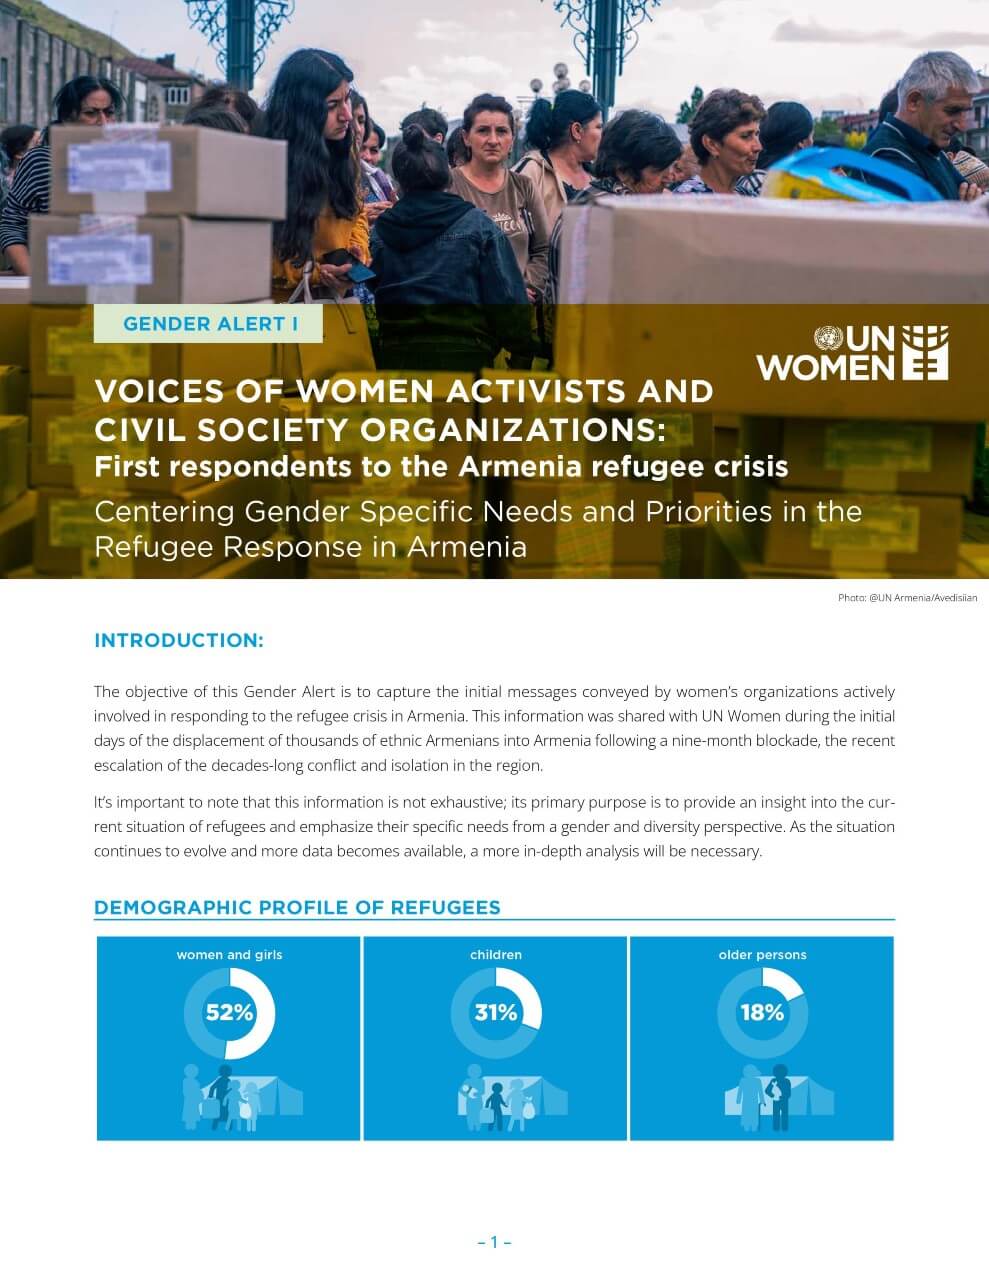 Armenia gender alert no. 1: Voices of women activists and civil society organizations: First respondents to the Armenia refugee crisis